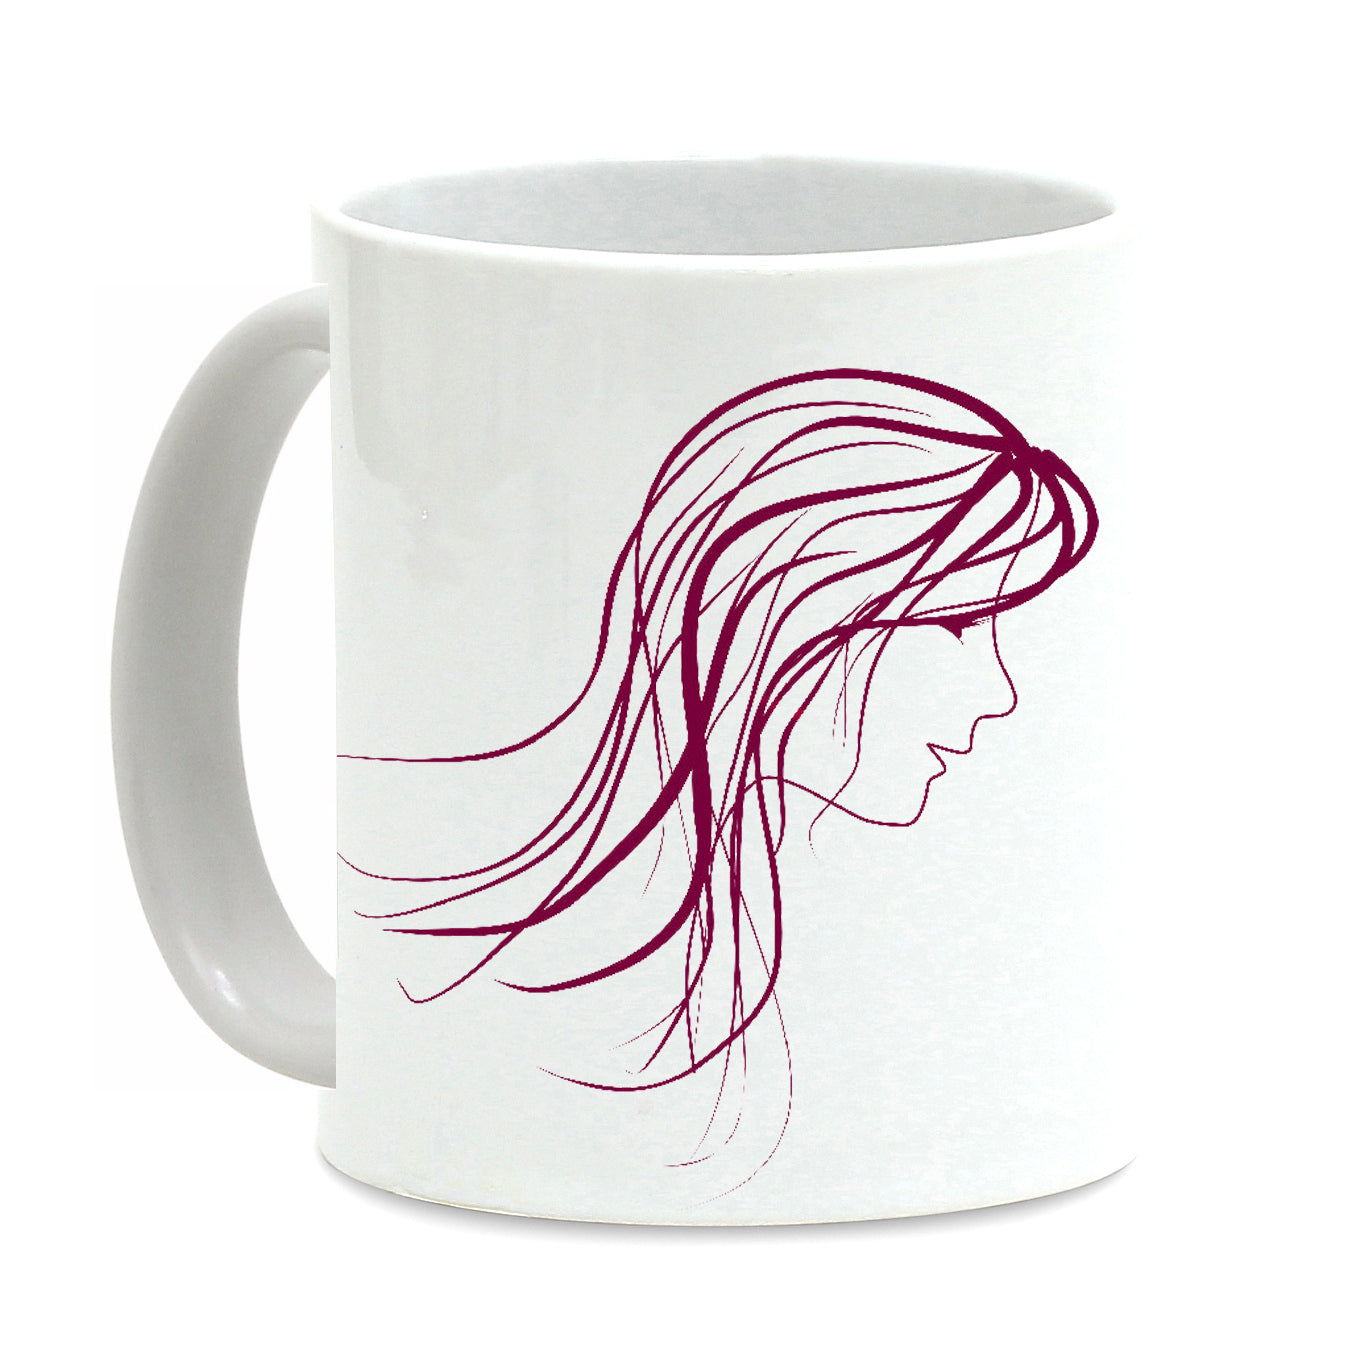 SUBLIMART: Bella Donna Lineart - Mug featuring styled hand drawn trendy women profiles drawings. - Artistica.com